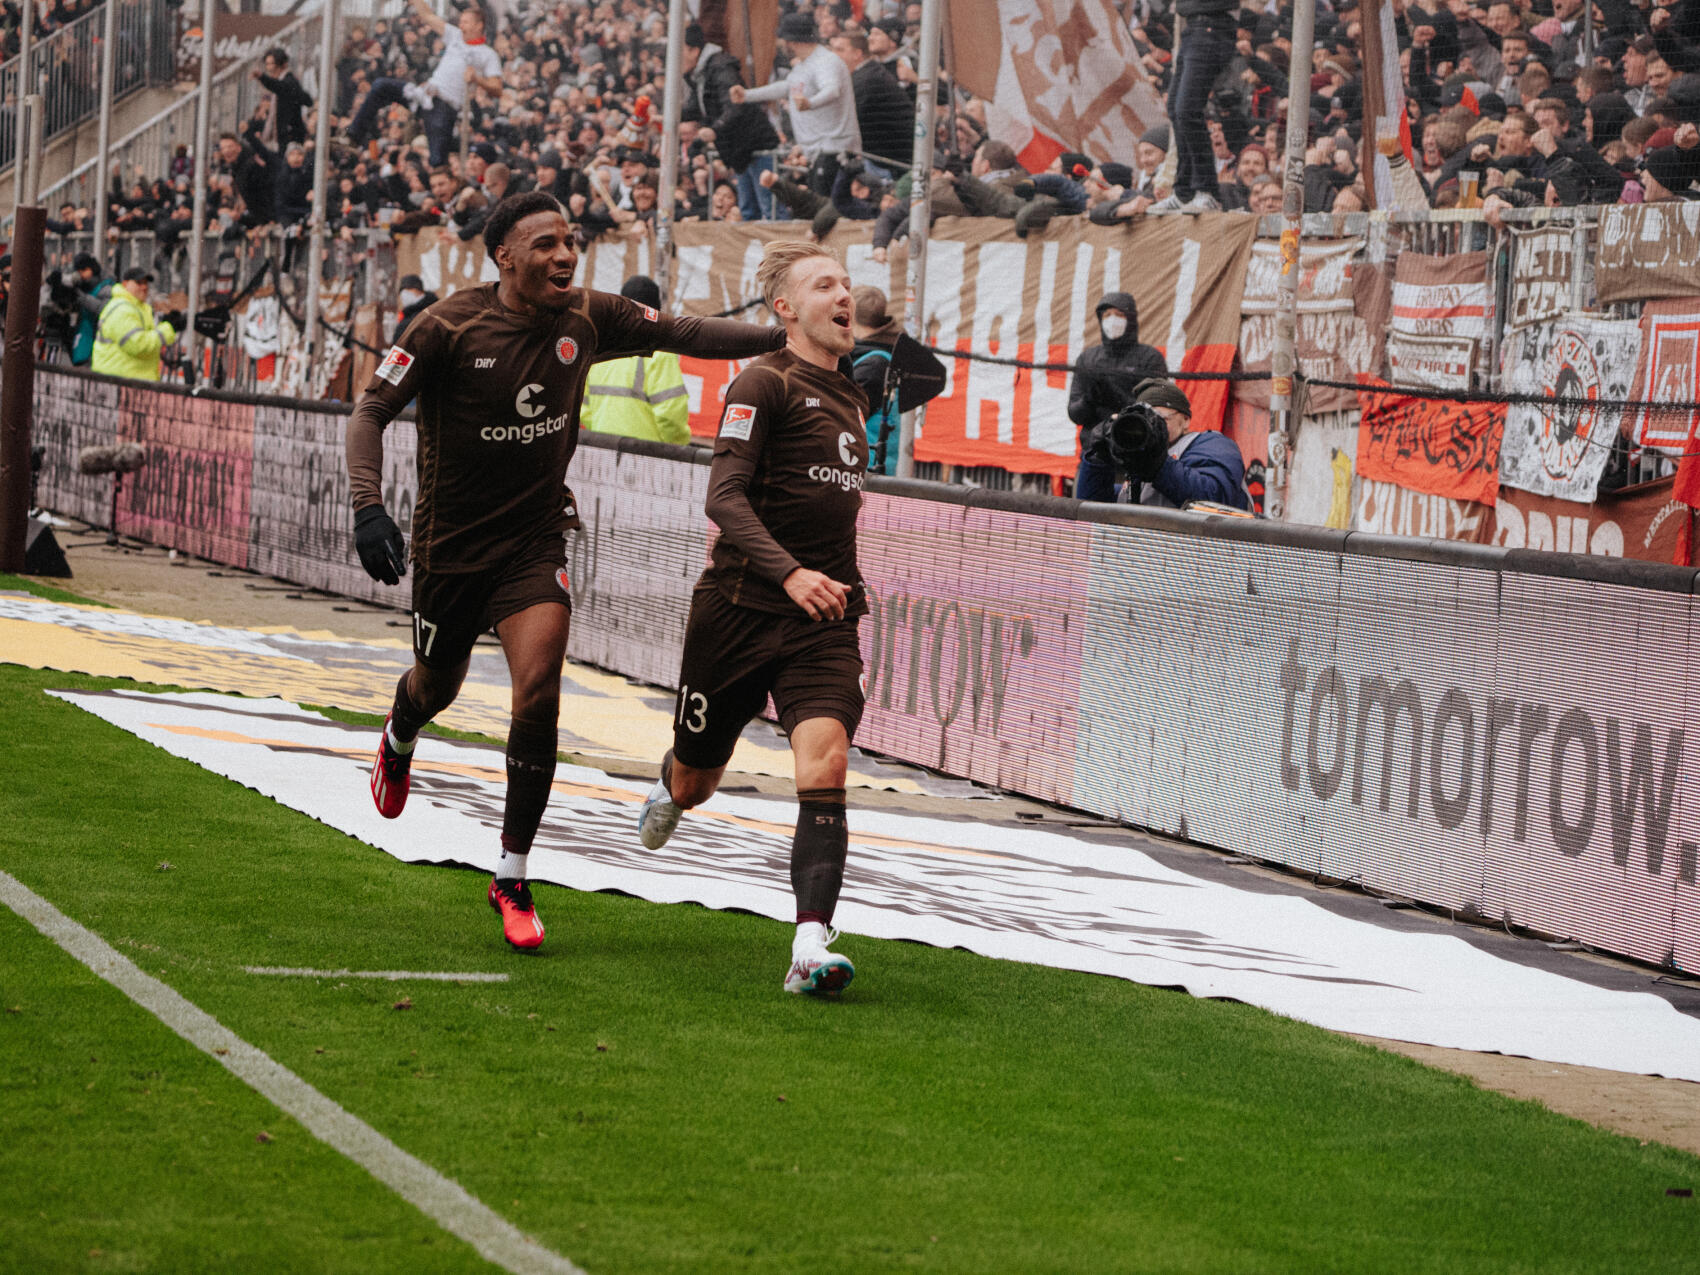 Oladapo Afolayan and goalscorer Lukas Daschner celebrate the opener in front of the South Stand.